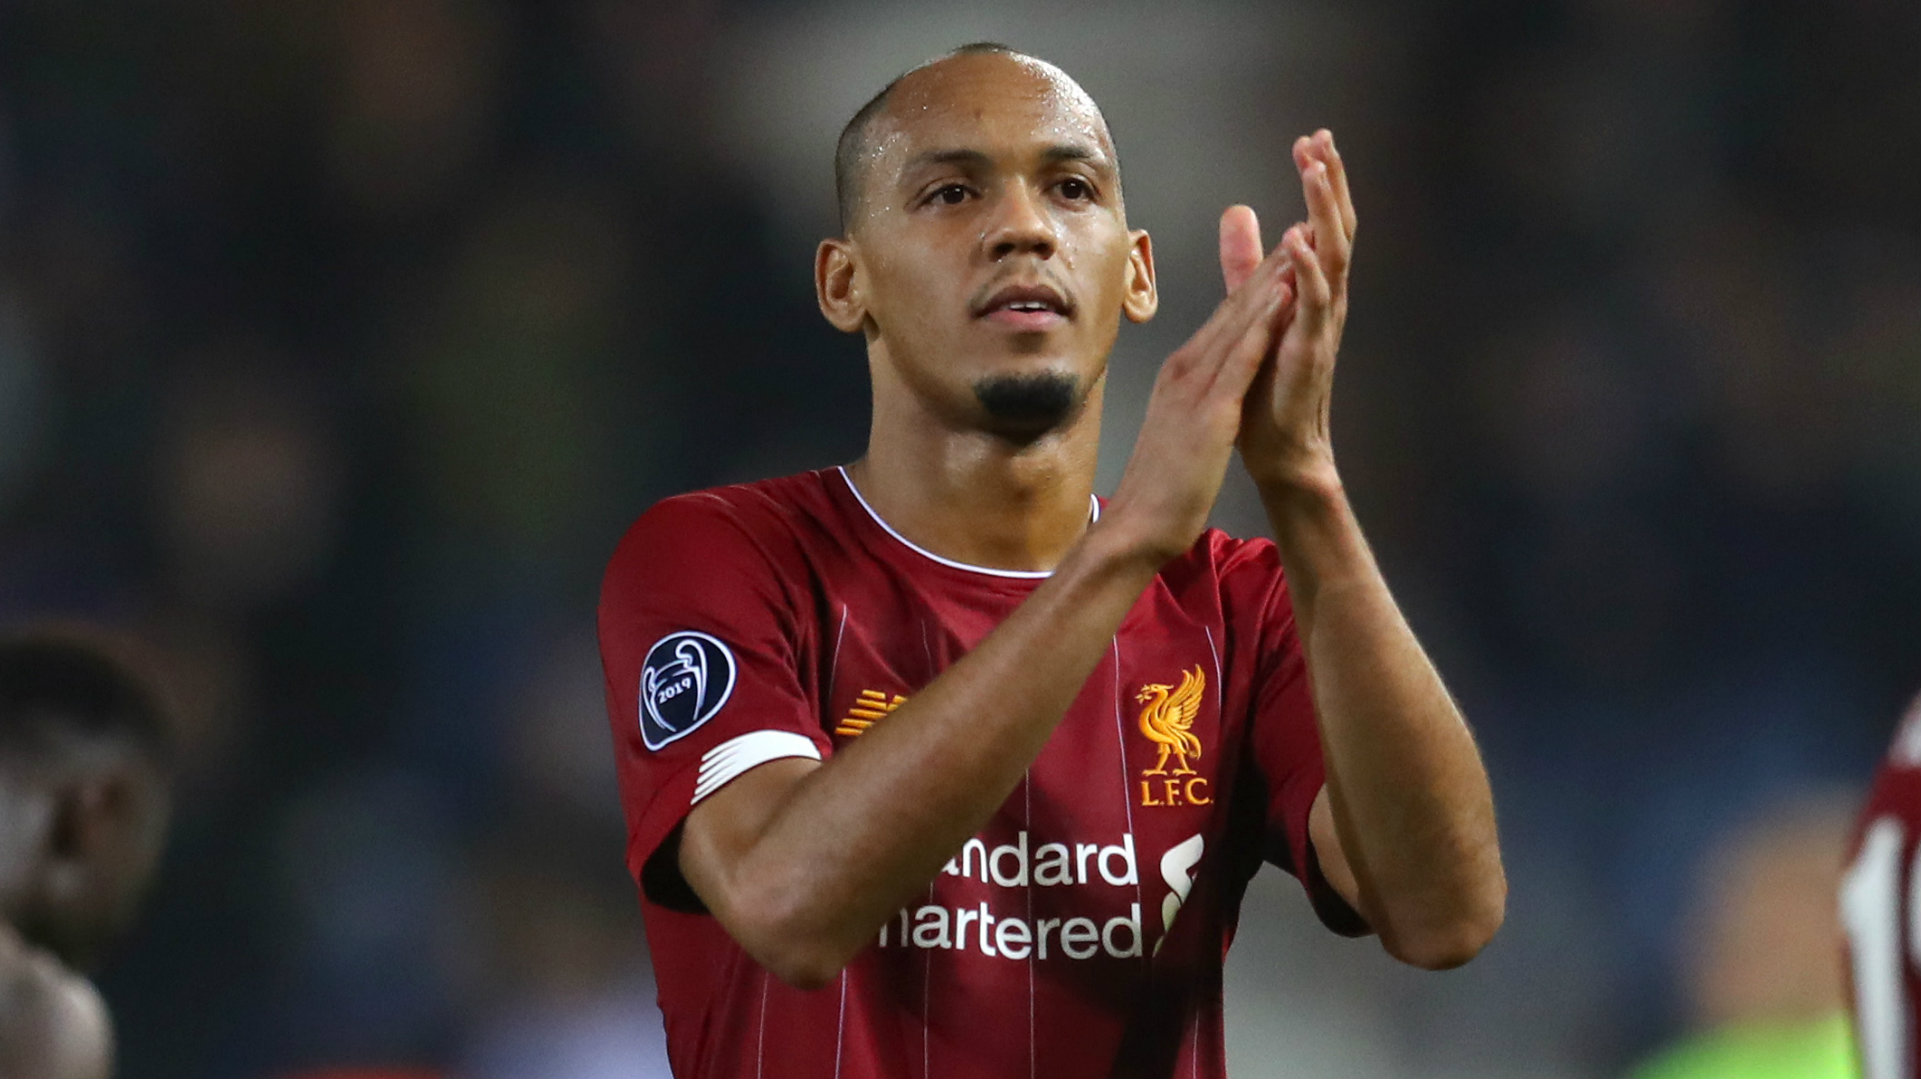 'We're not the only team with injuries'-Klopp believes in Liverpool depth after Fabinho setback